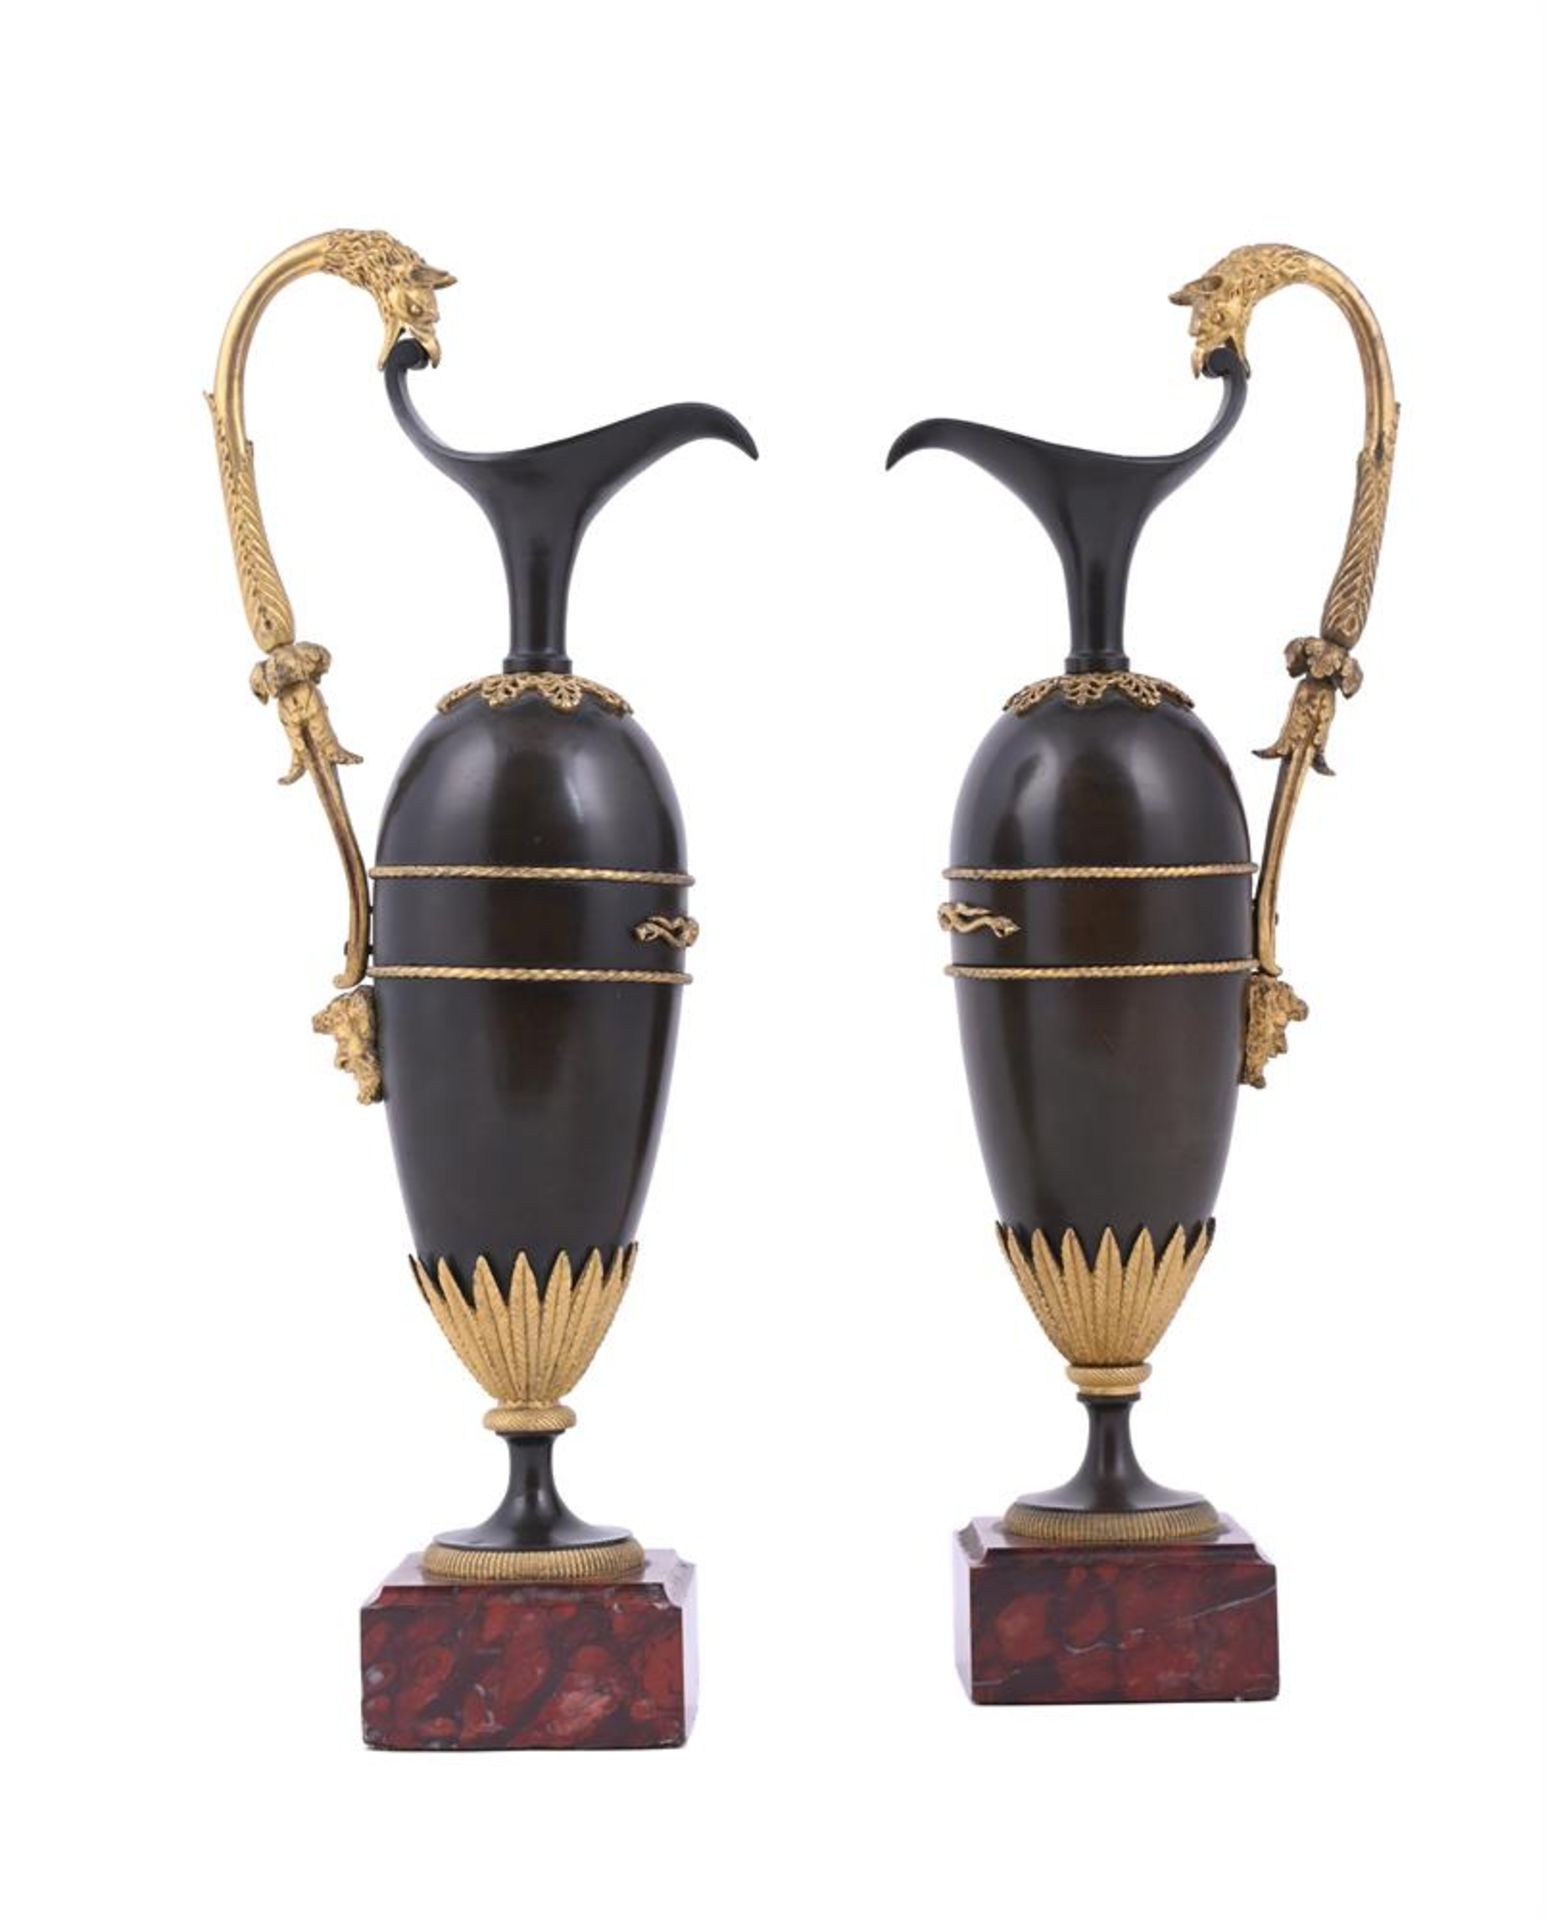 A PAIR OF PATINATED METAL AND PARCEL GILT EWERS IN NEOCLASSICAL TASTE